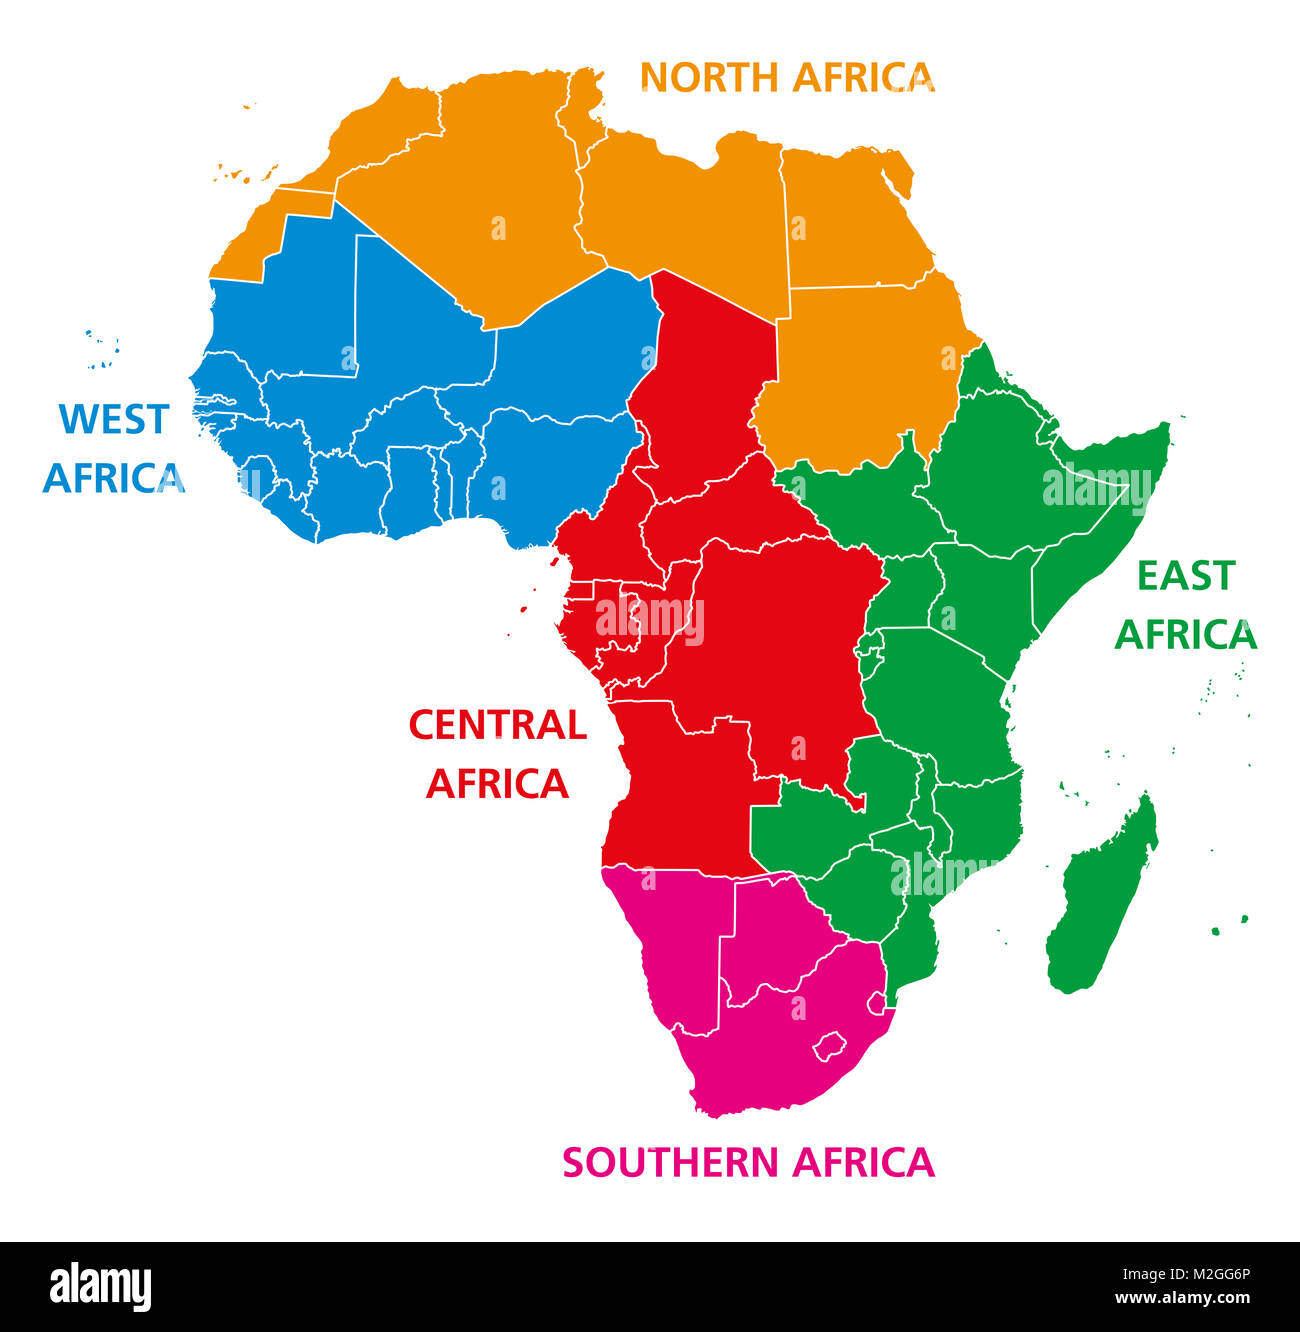 Regions Of Africa Political Map United Nations Geoscheme With